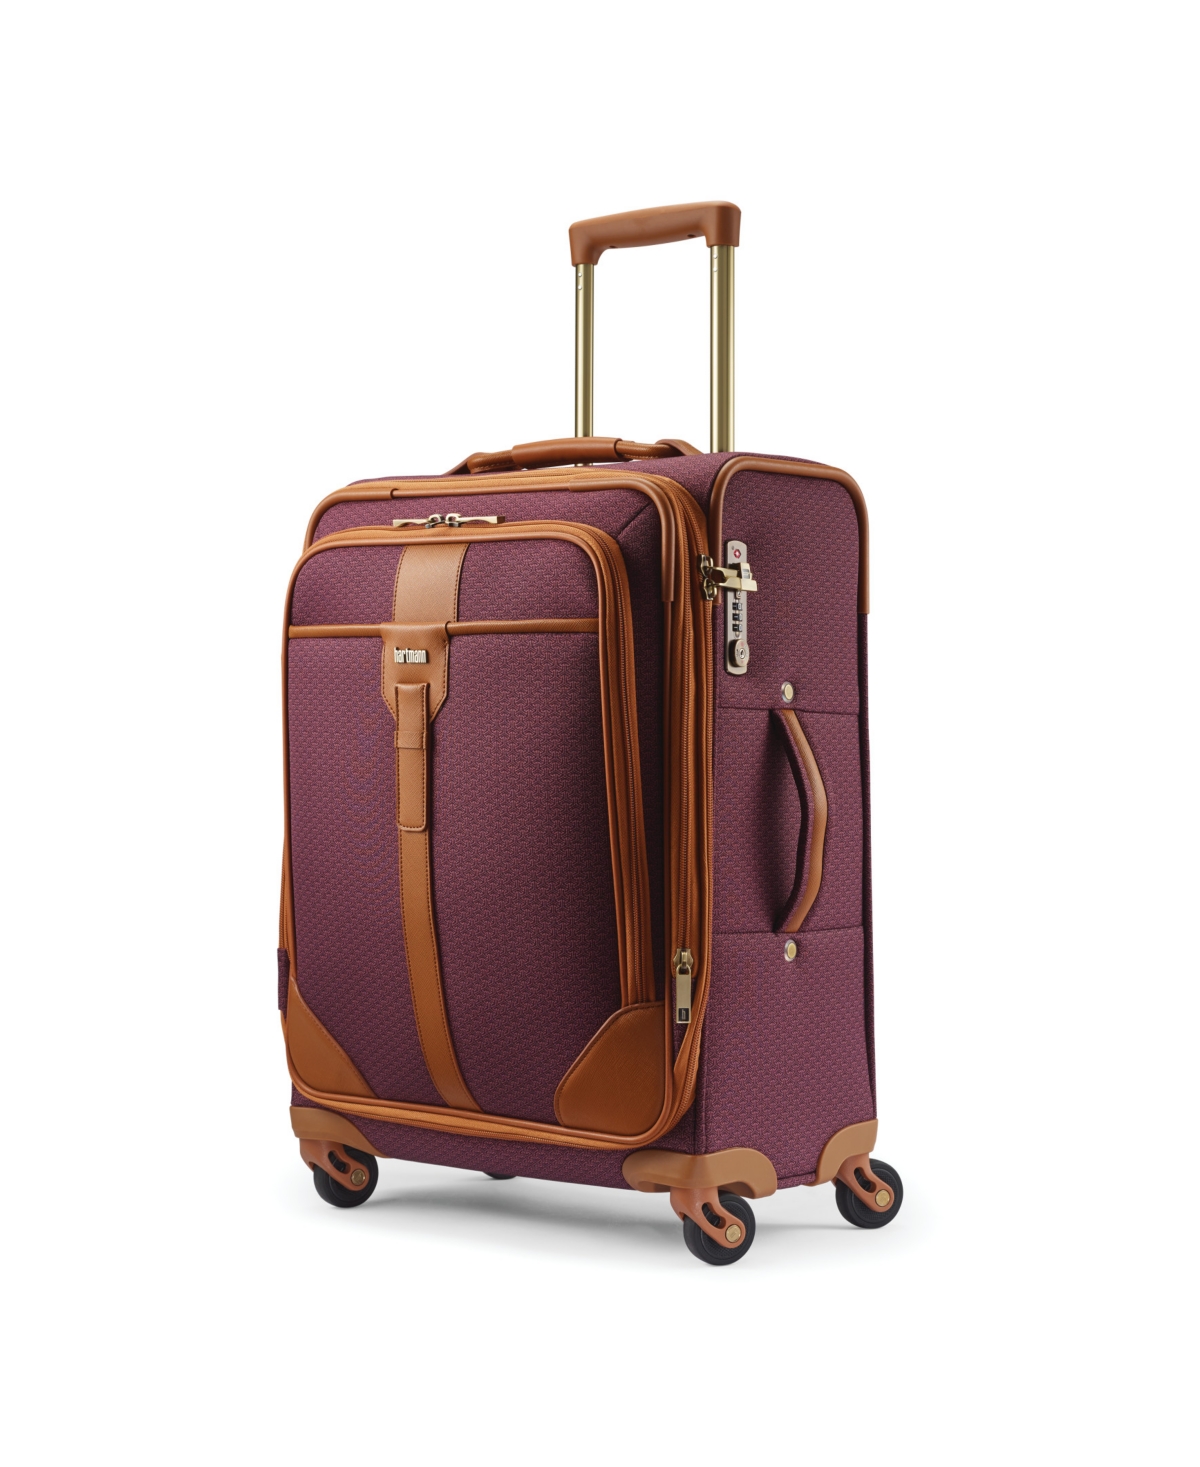 Luxe Ii Carry-on Expandable Spinner - Burgundy, Tan